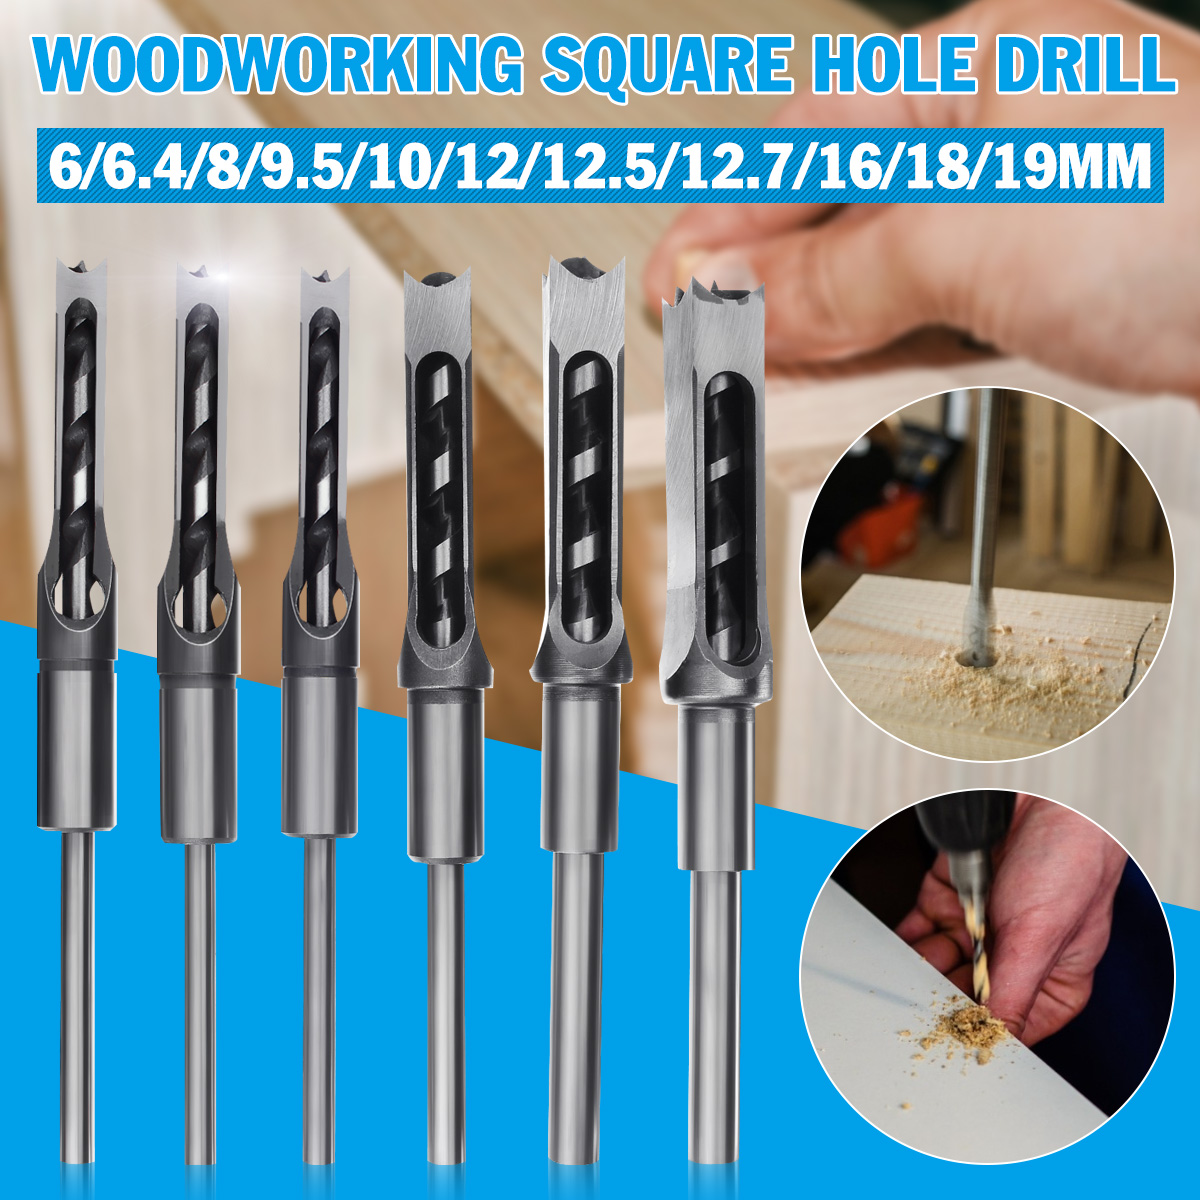 6-19mm-Woodworking-Drill-Bit-Square-Hole-Chisel-Mortising-Kit-Tenon-Wood-Tool-1615910-1